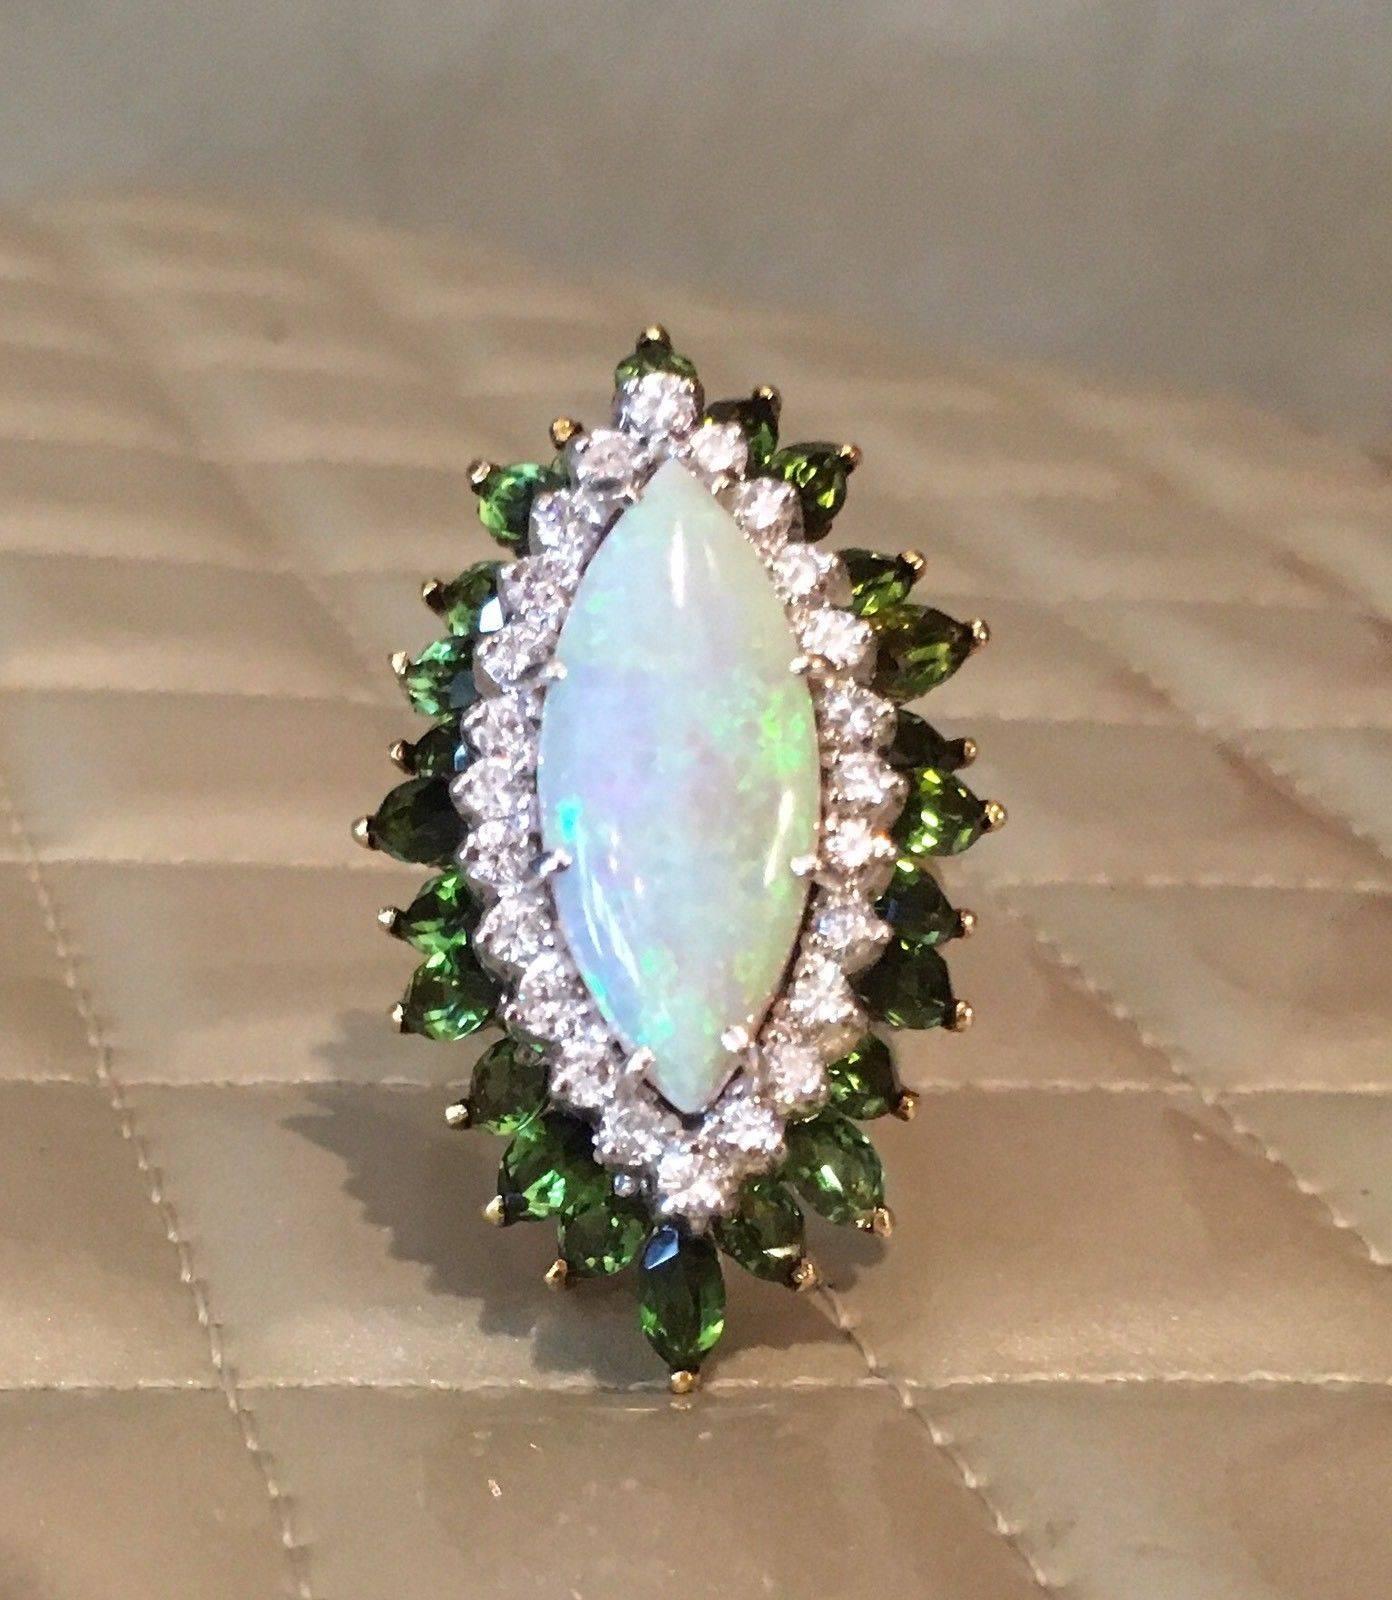 Impressive La Triomphe Designer 18K Yellow Gold Opal Cabochon and 5.28 Cttw Green Tourmaline Diamond Cocktail Ring

This stunning large statement ring features a marquise opal cabochon at he center, with 4.08 carats of marquise green tourmaline set